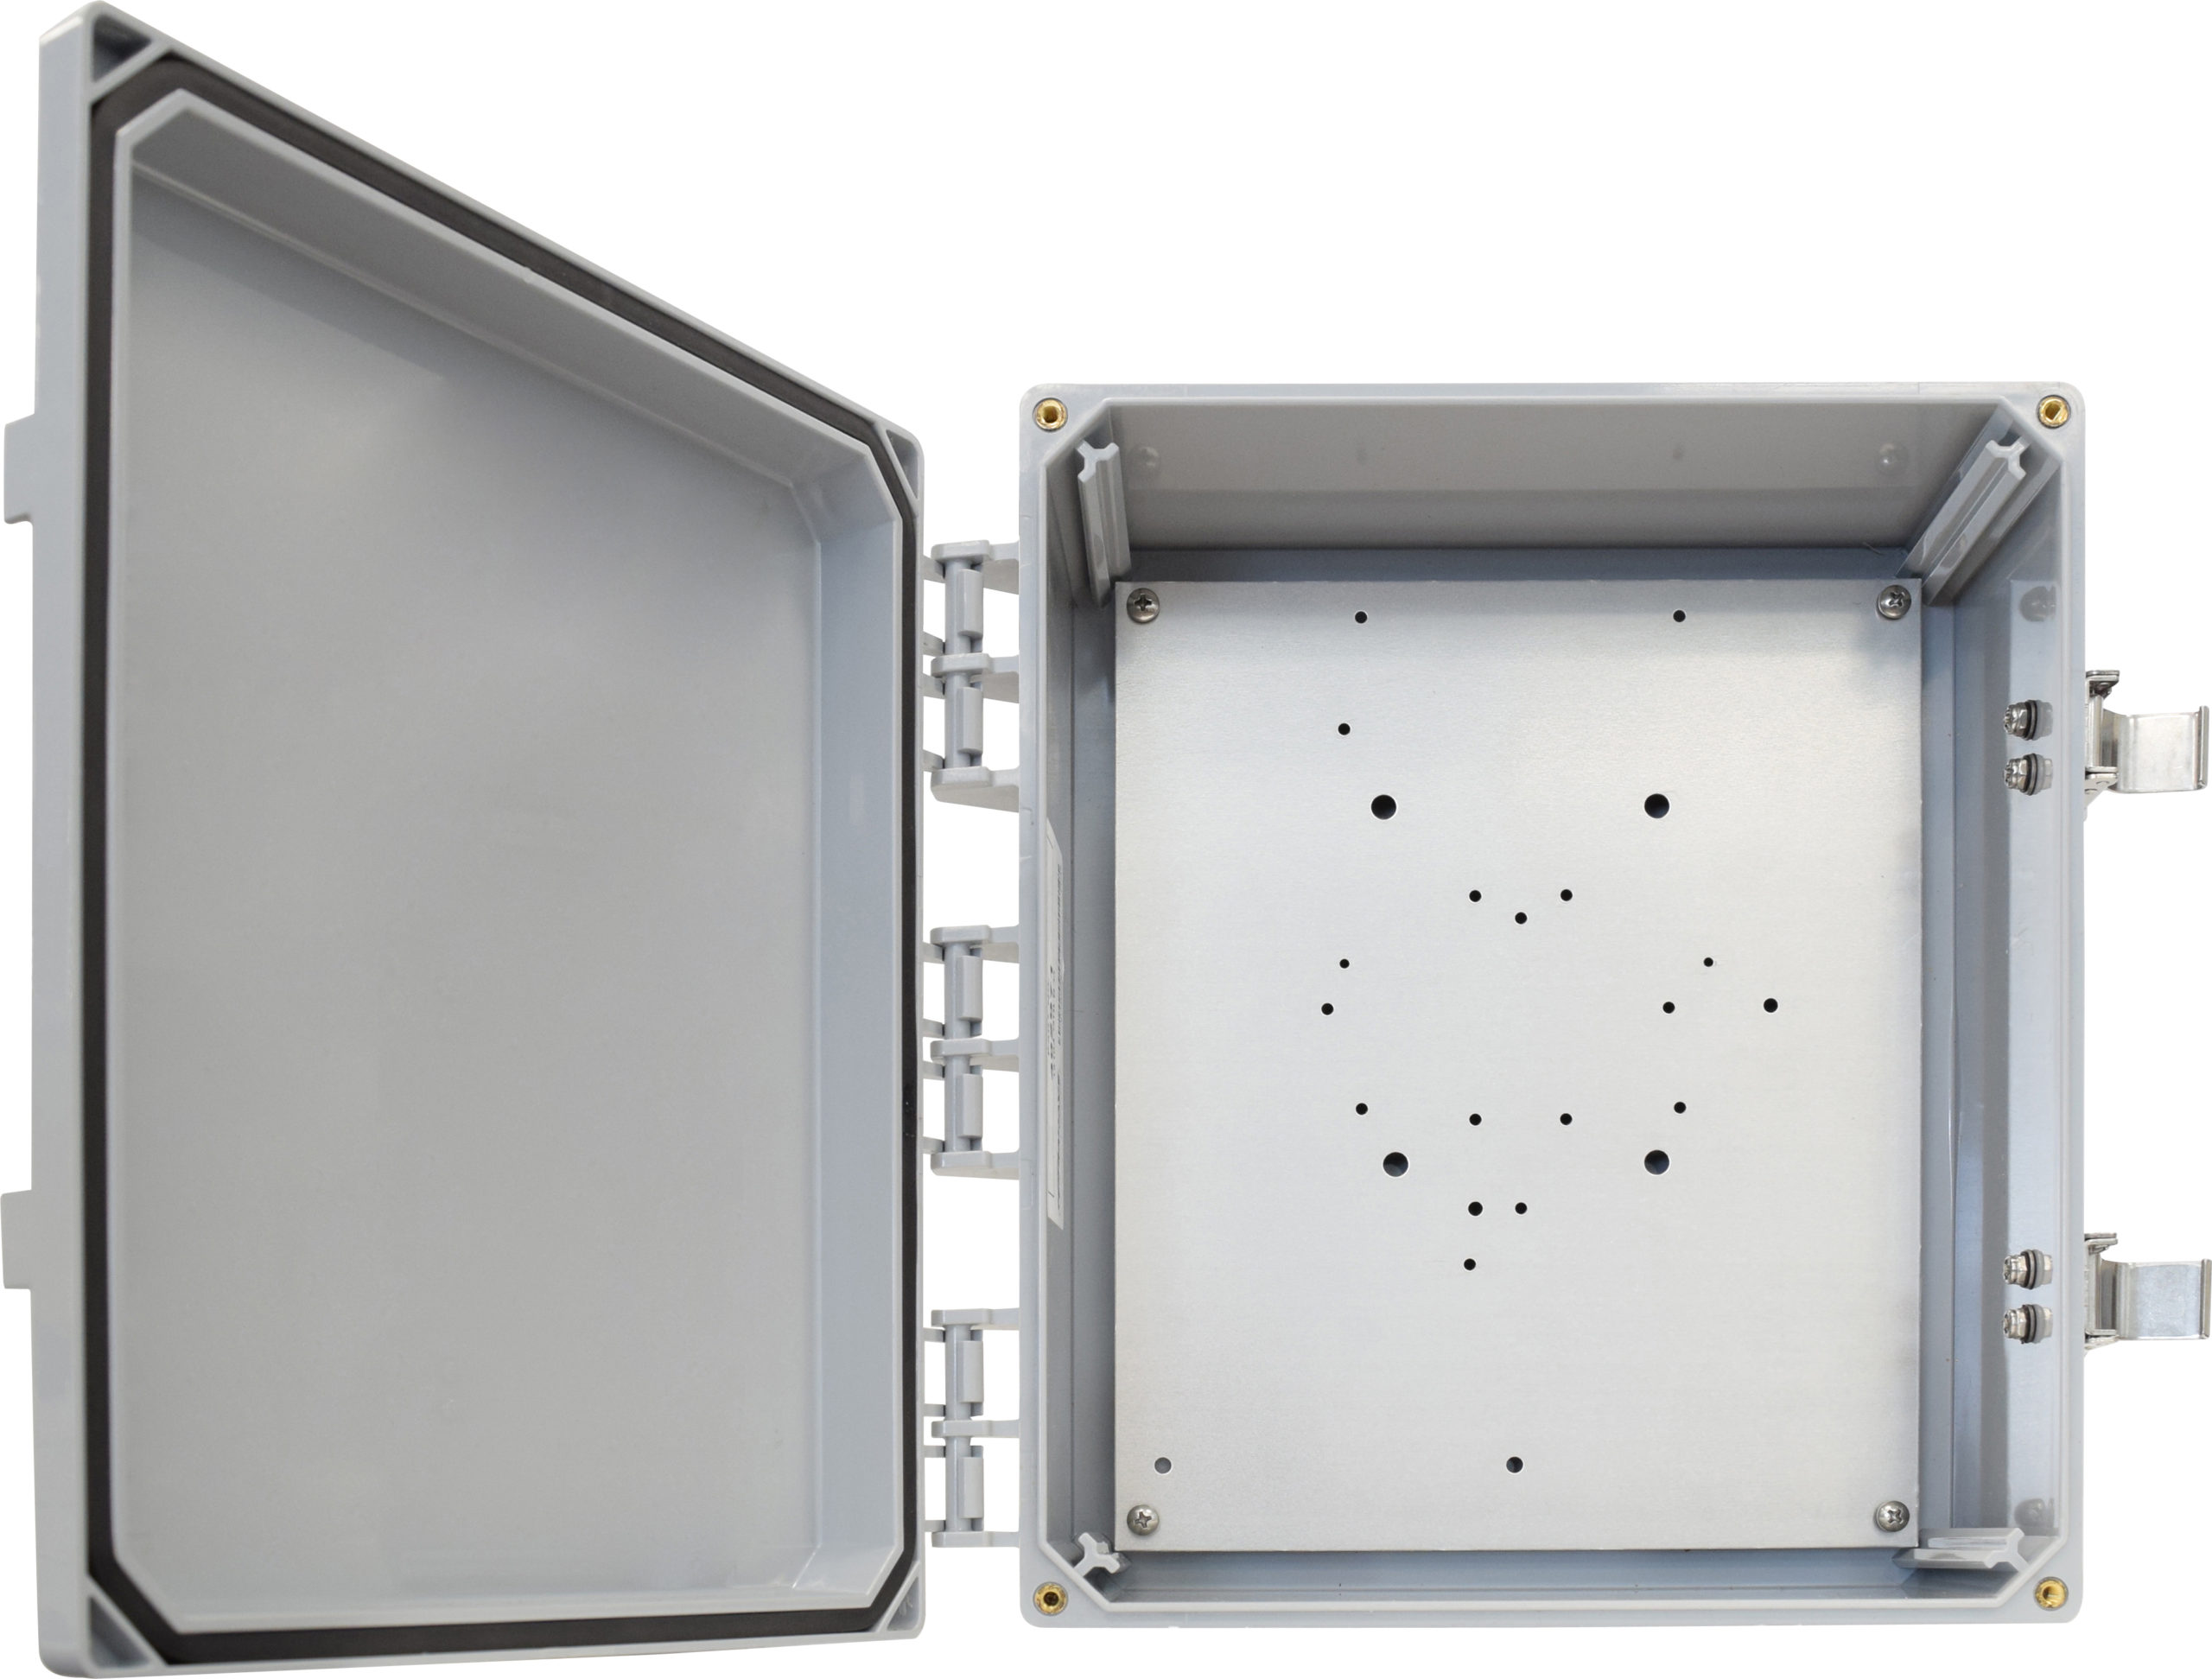 14x12x6” NEMA Enclosure with Solid Door, Latch Locks with an 8-Pin DART Connector Pass-Through for Cisco 9130AXE